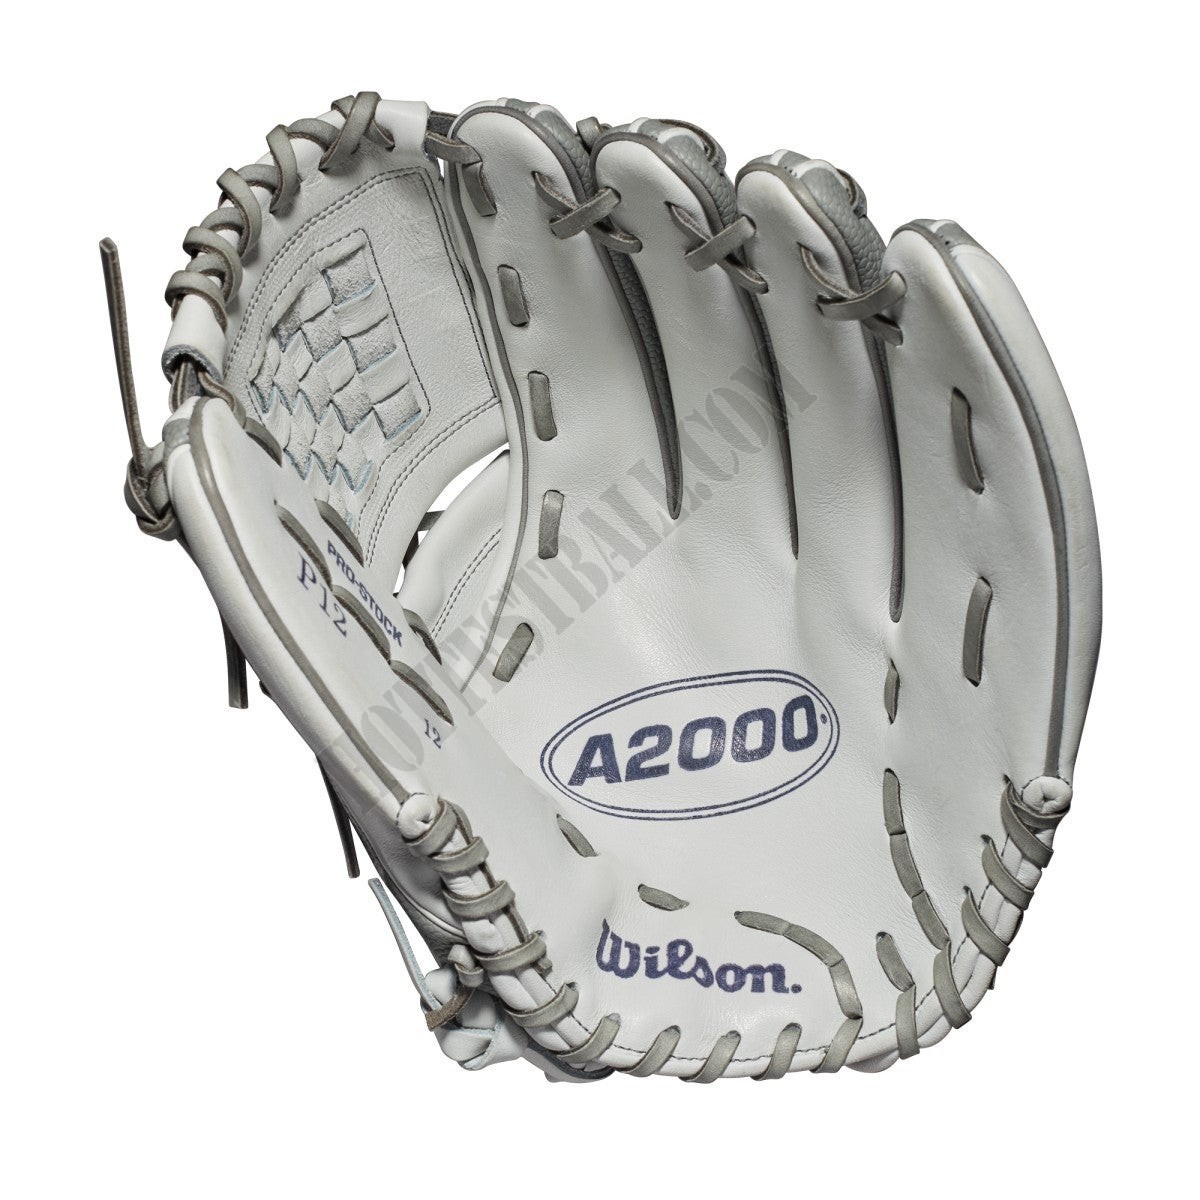 2019 A2000 P12 12" Pitcher's Fastpitch Glove ● Wilson Promotions - -2